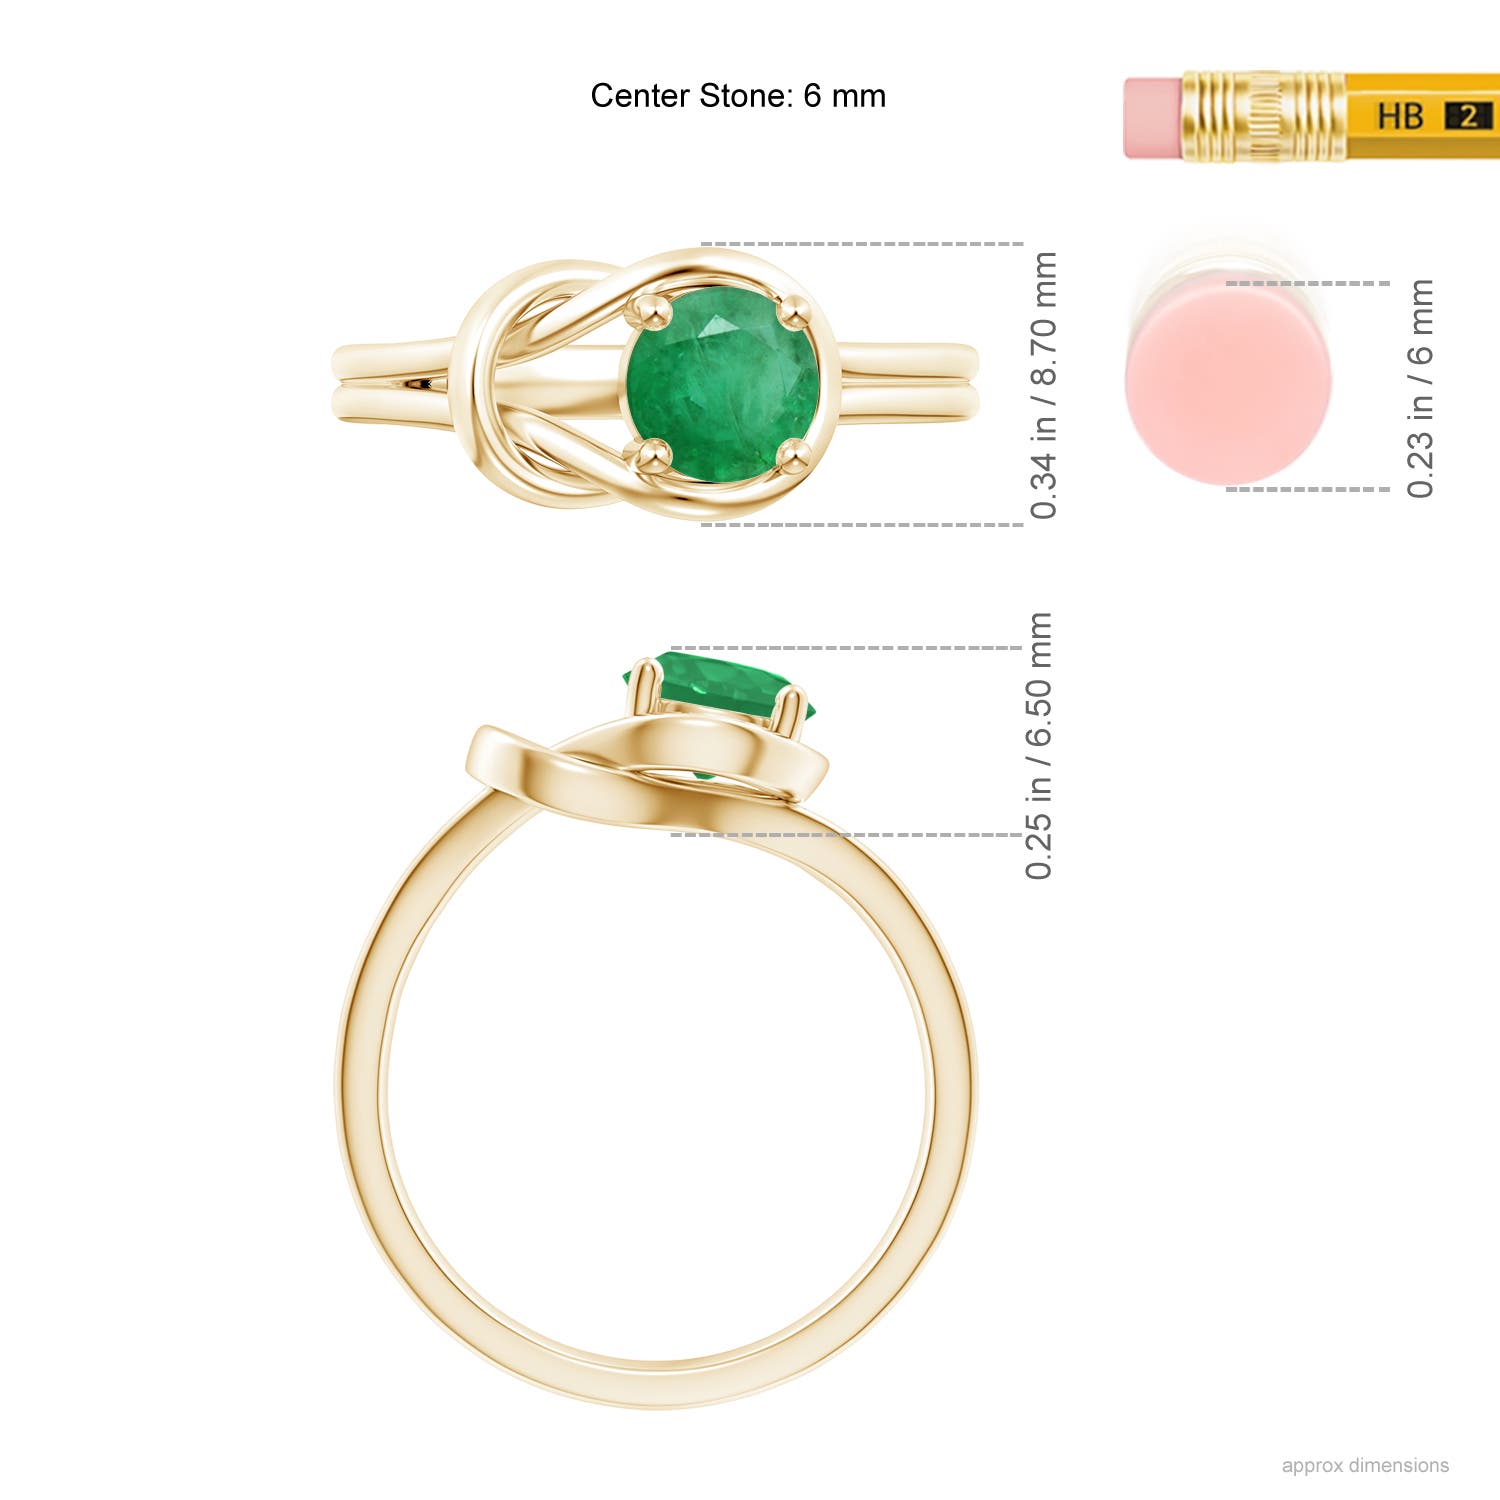 A - Emerald / 0.75 CT / 14 KT Yellow Gold